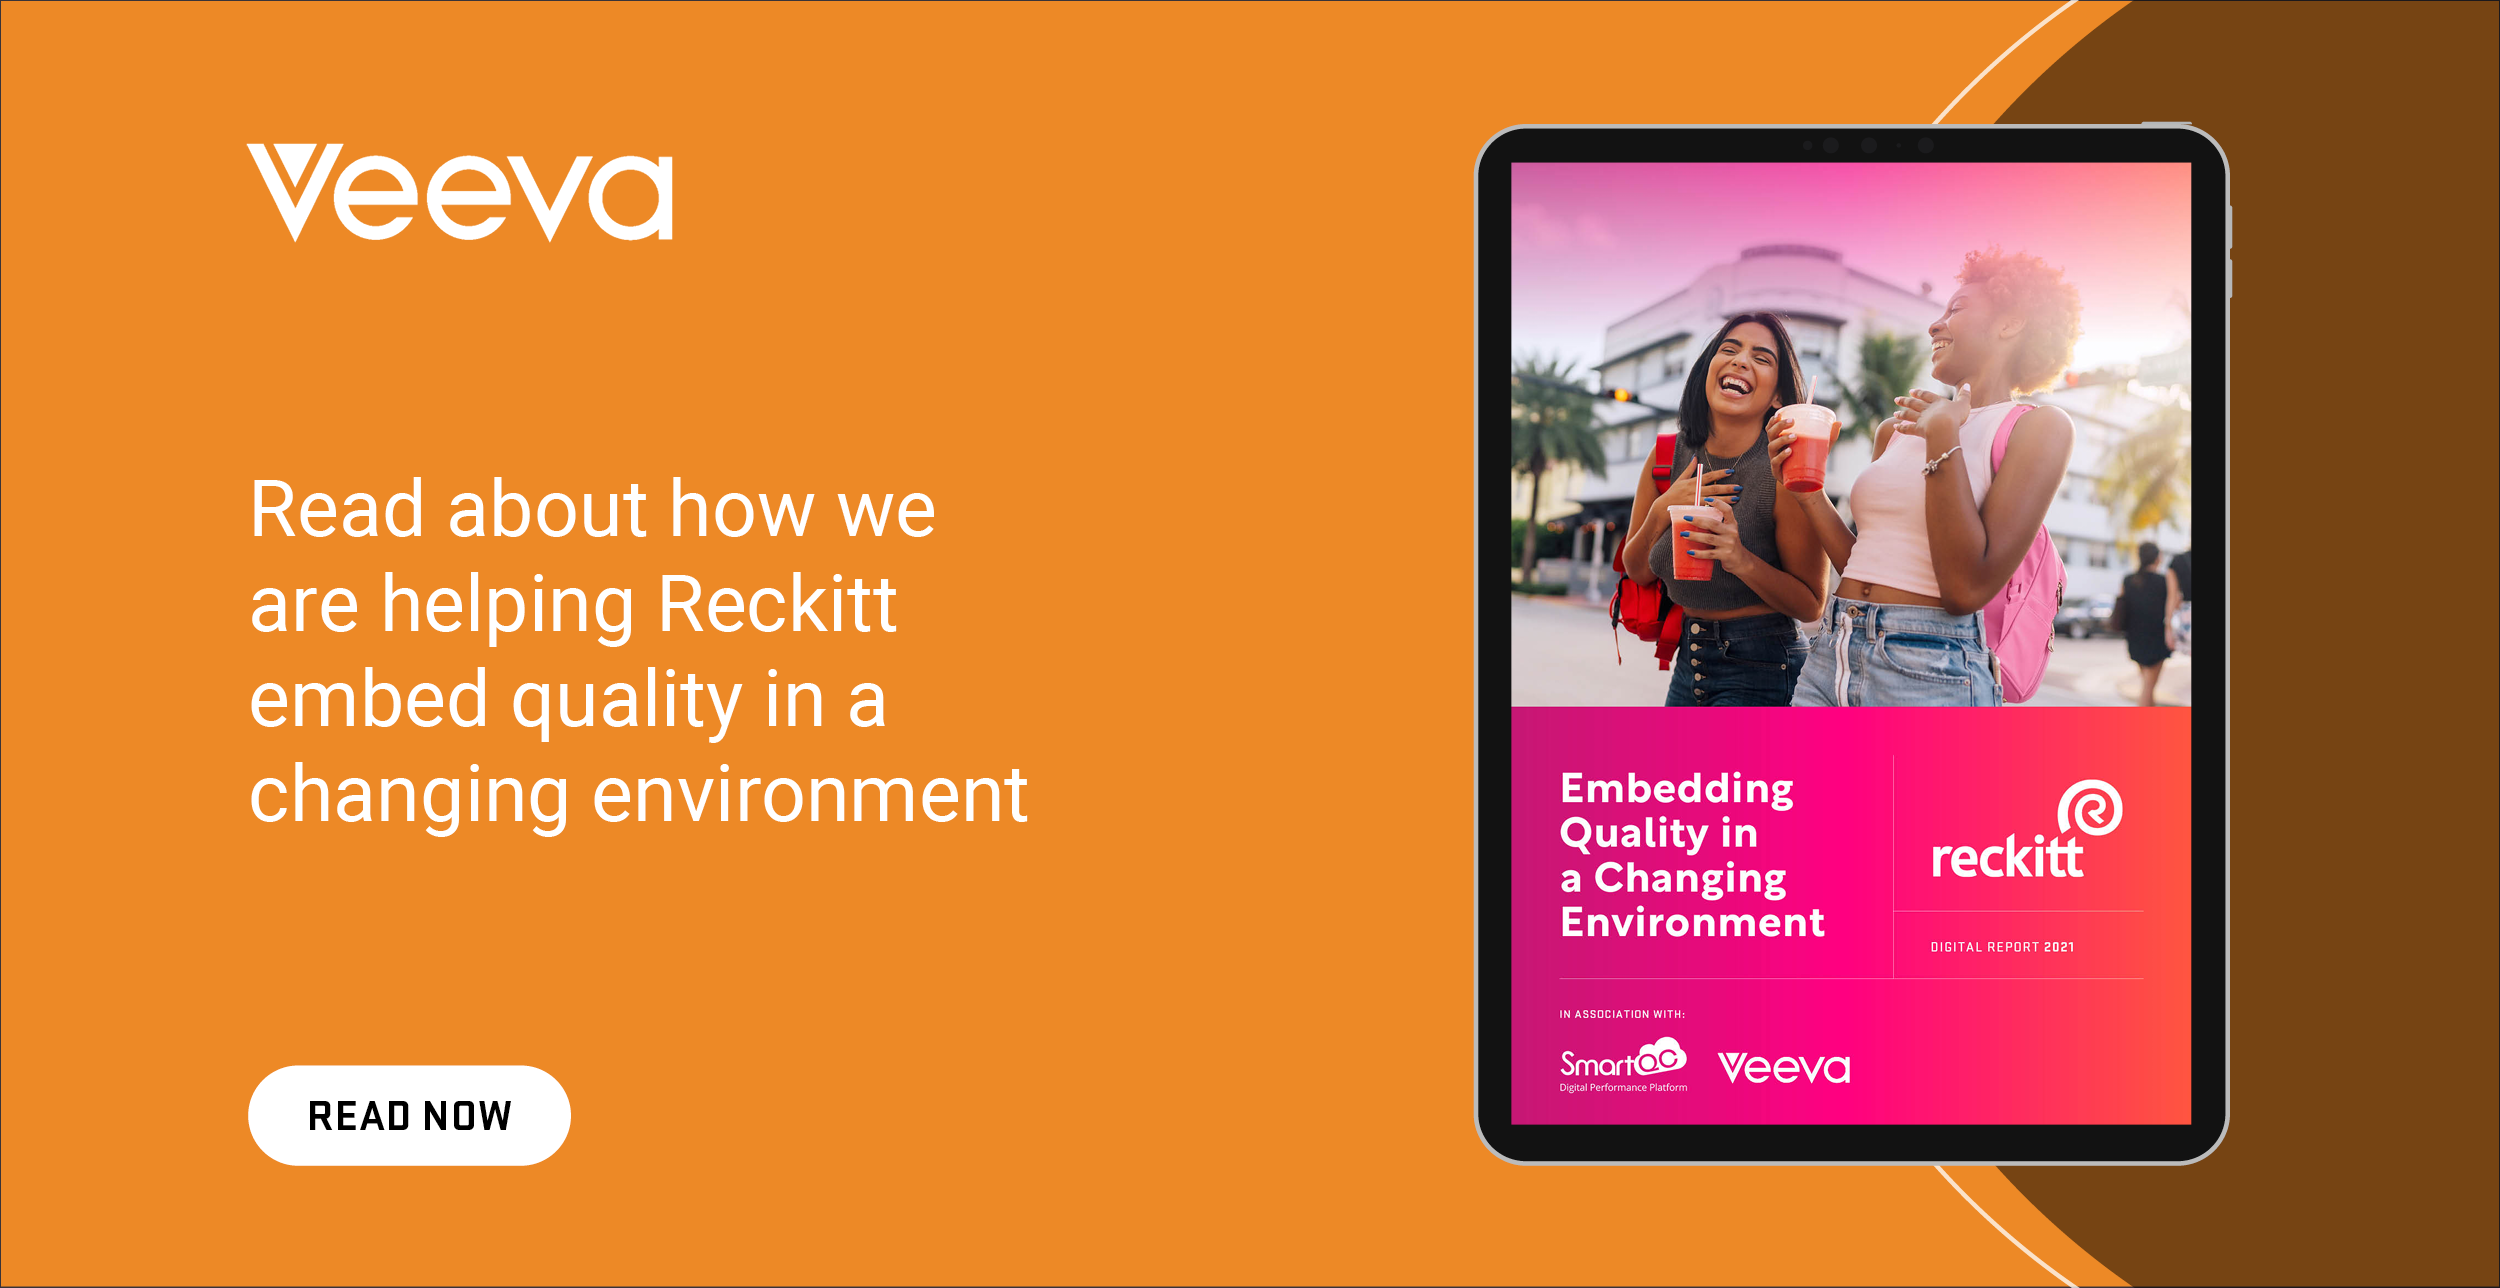 Veeva systems helping Reckitt embed quality in a changing environment